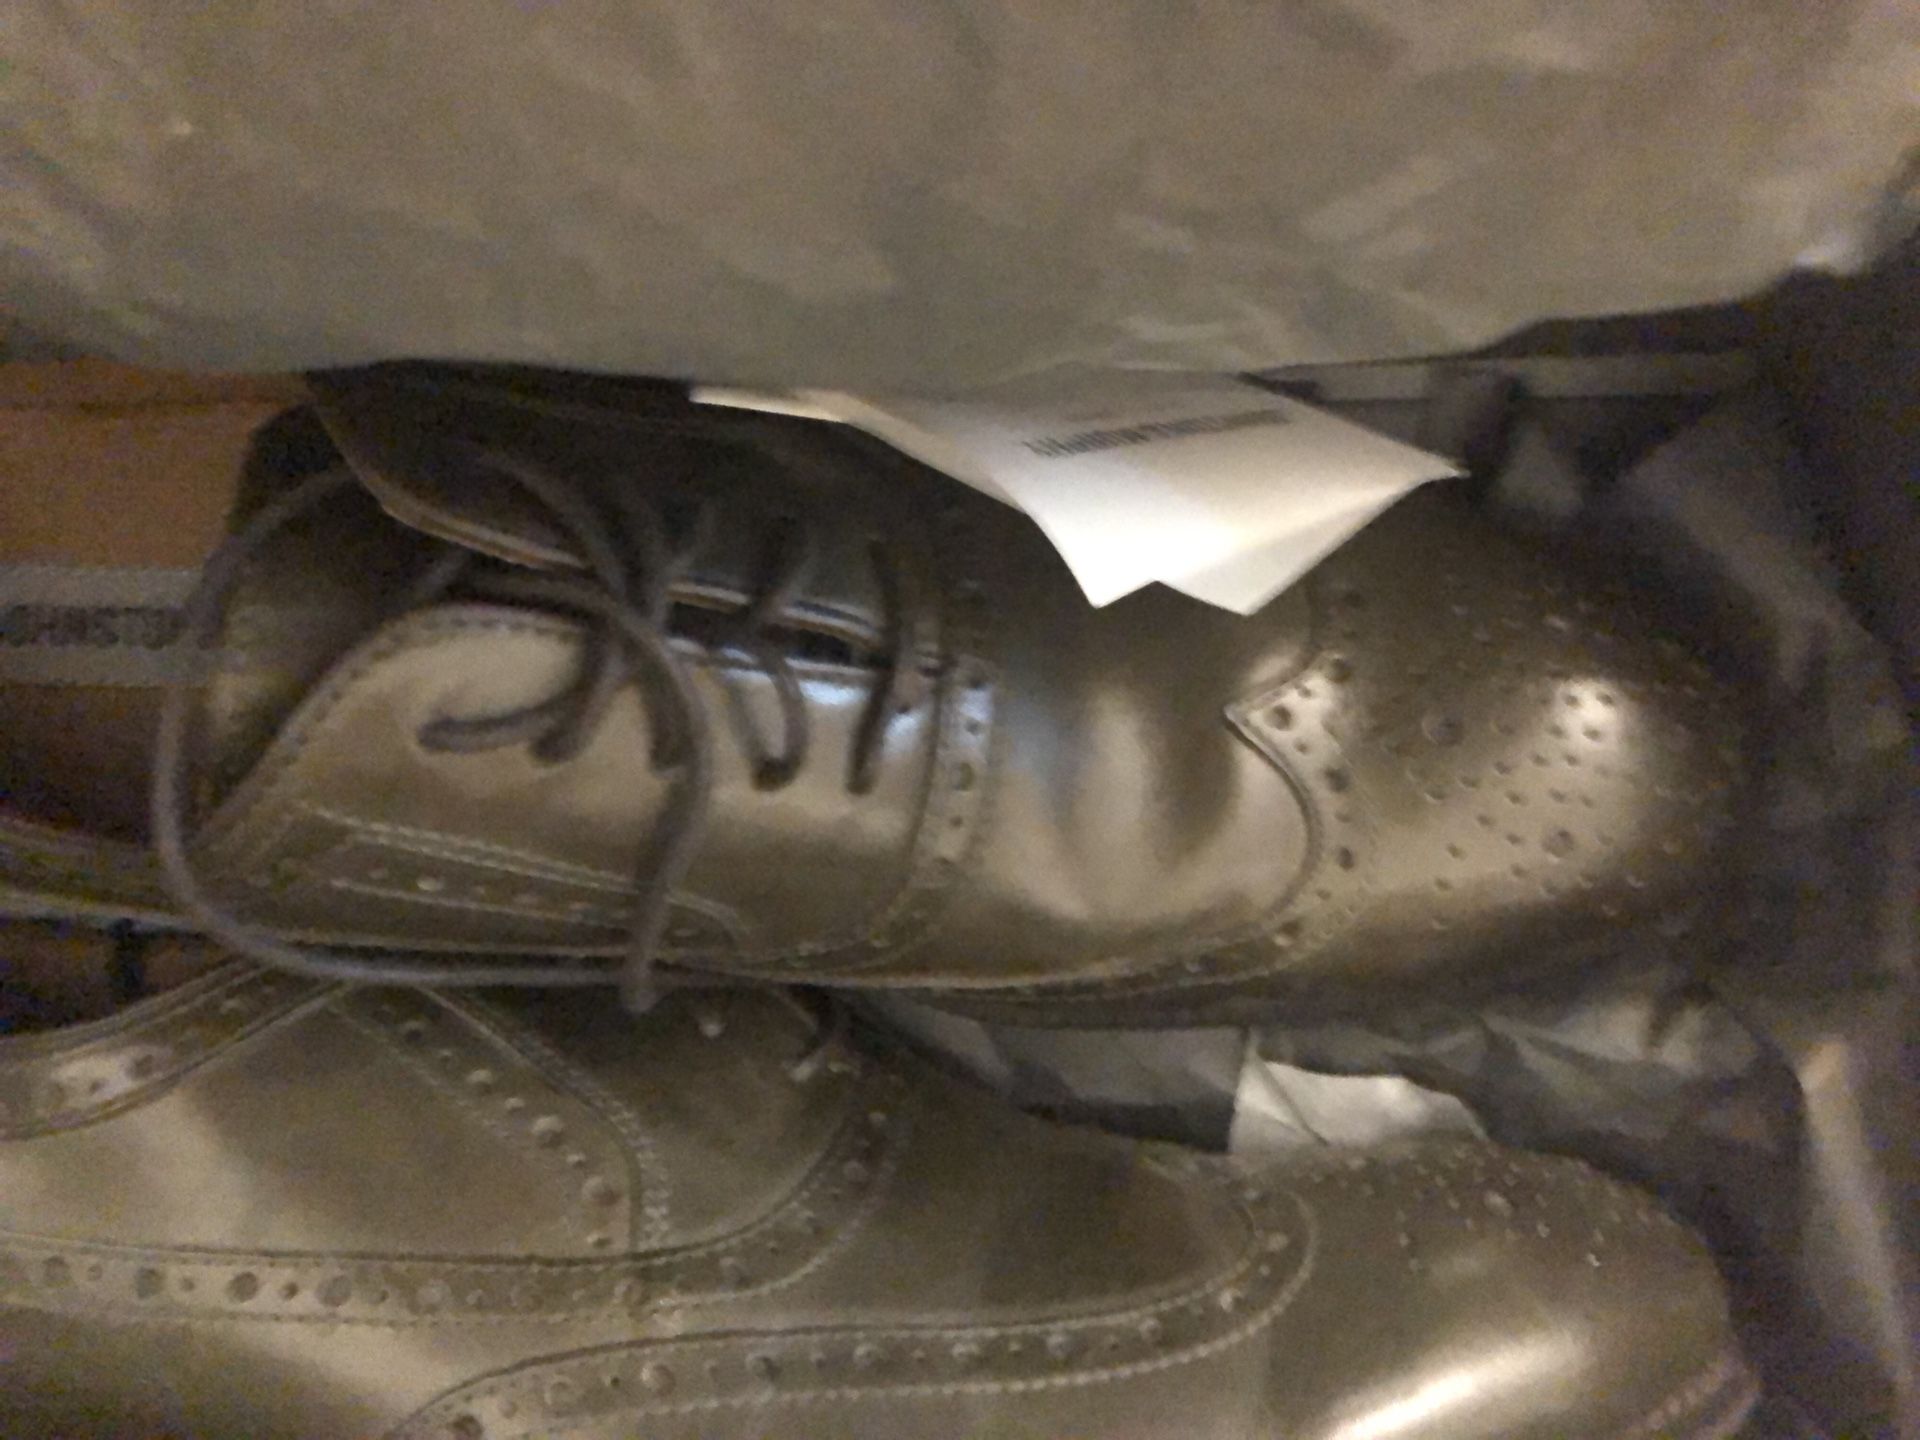 Johnston And Murphy Italian Leather Dress Shoes 8.5